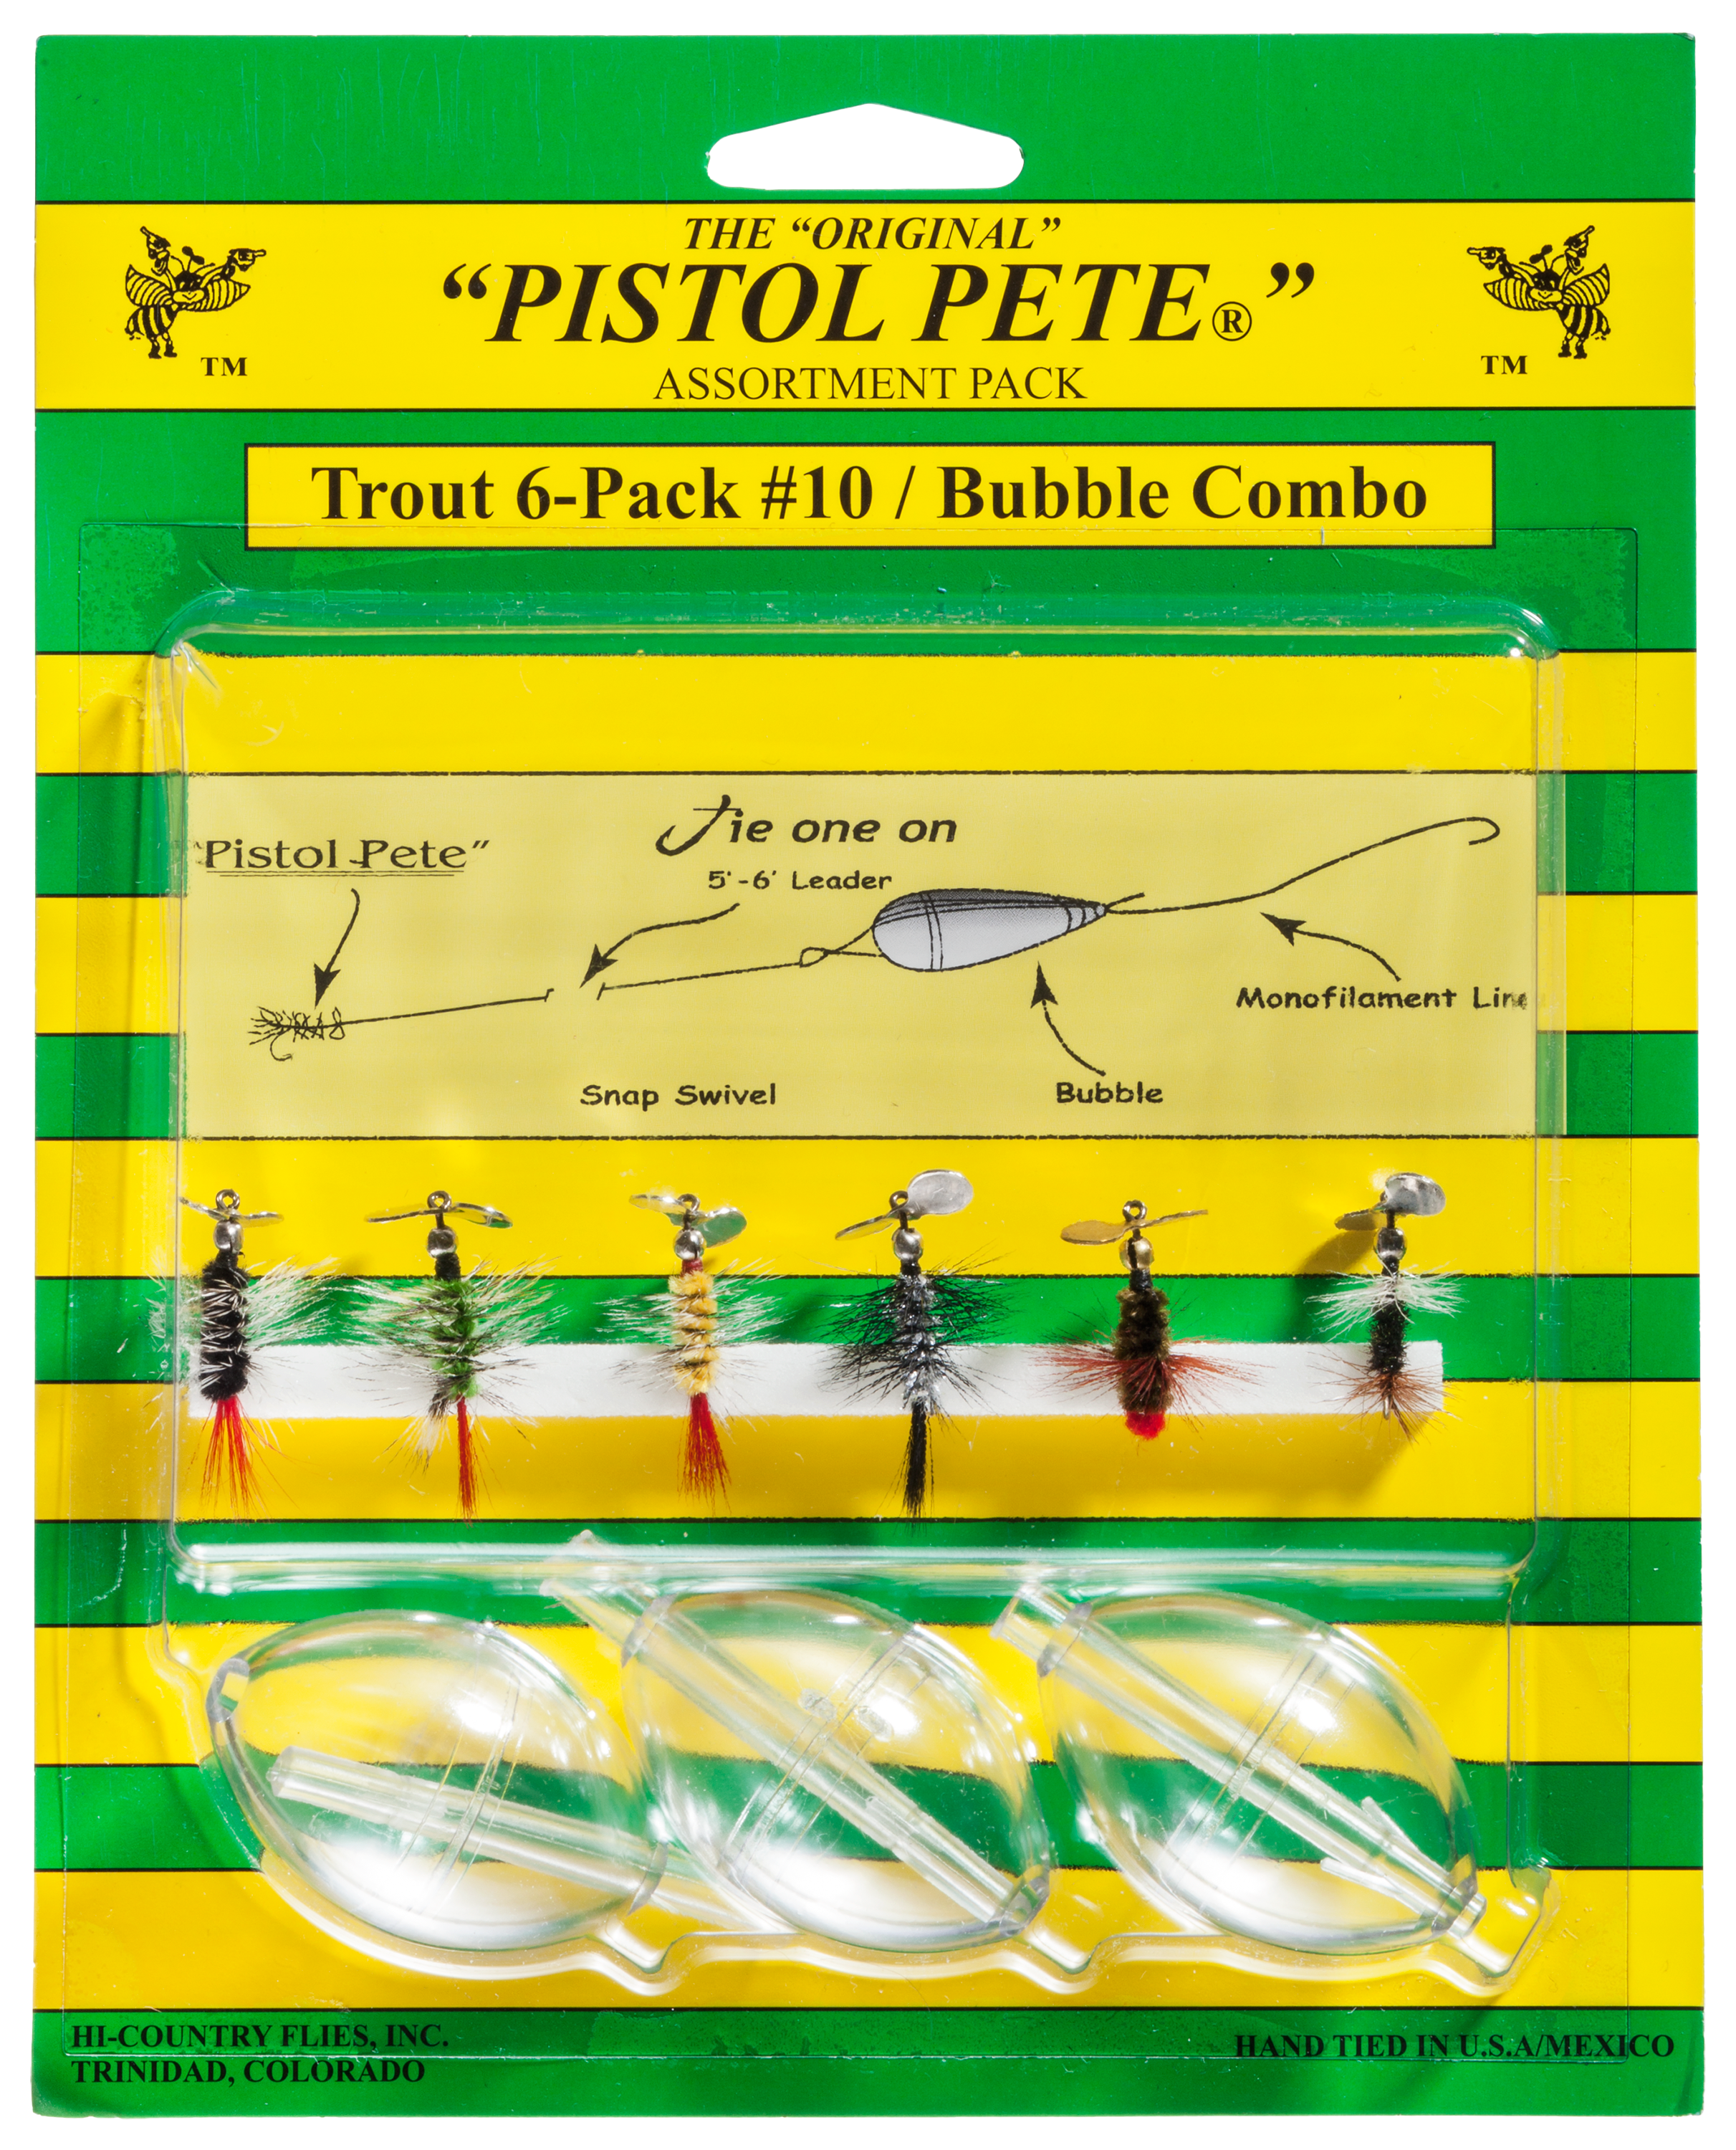 Best Trout Lures for Trolling 